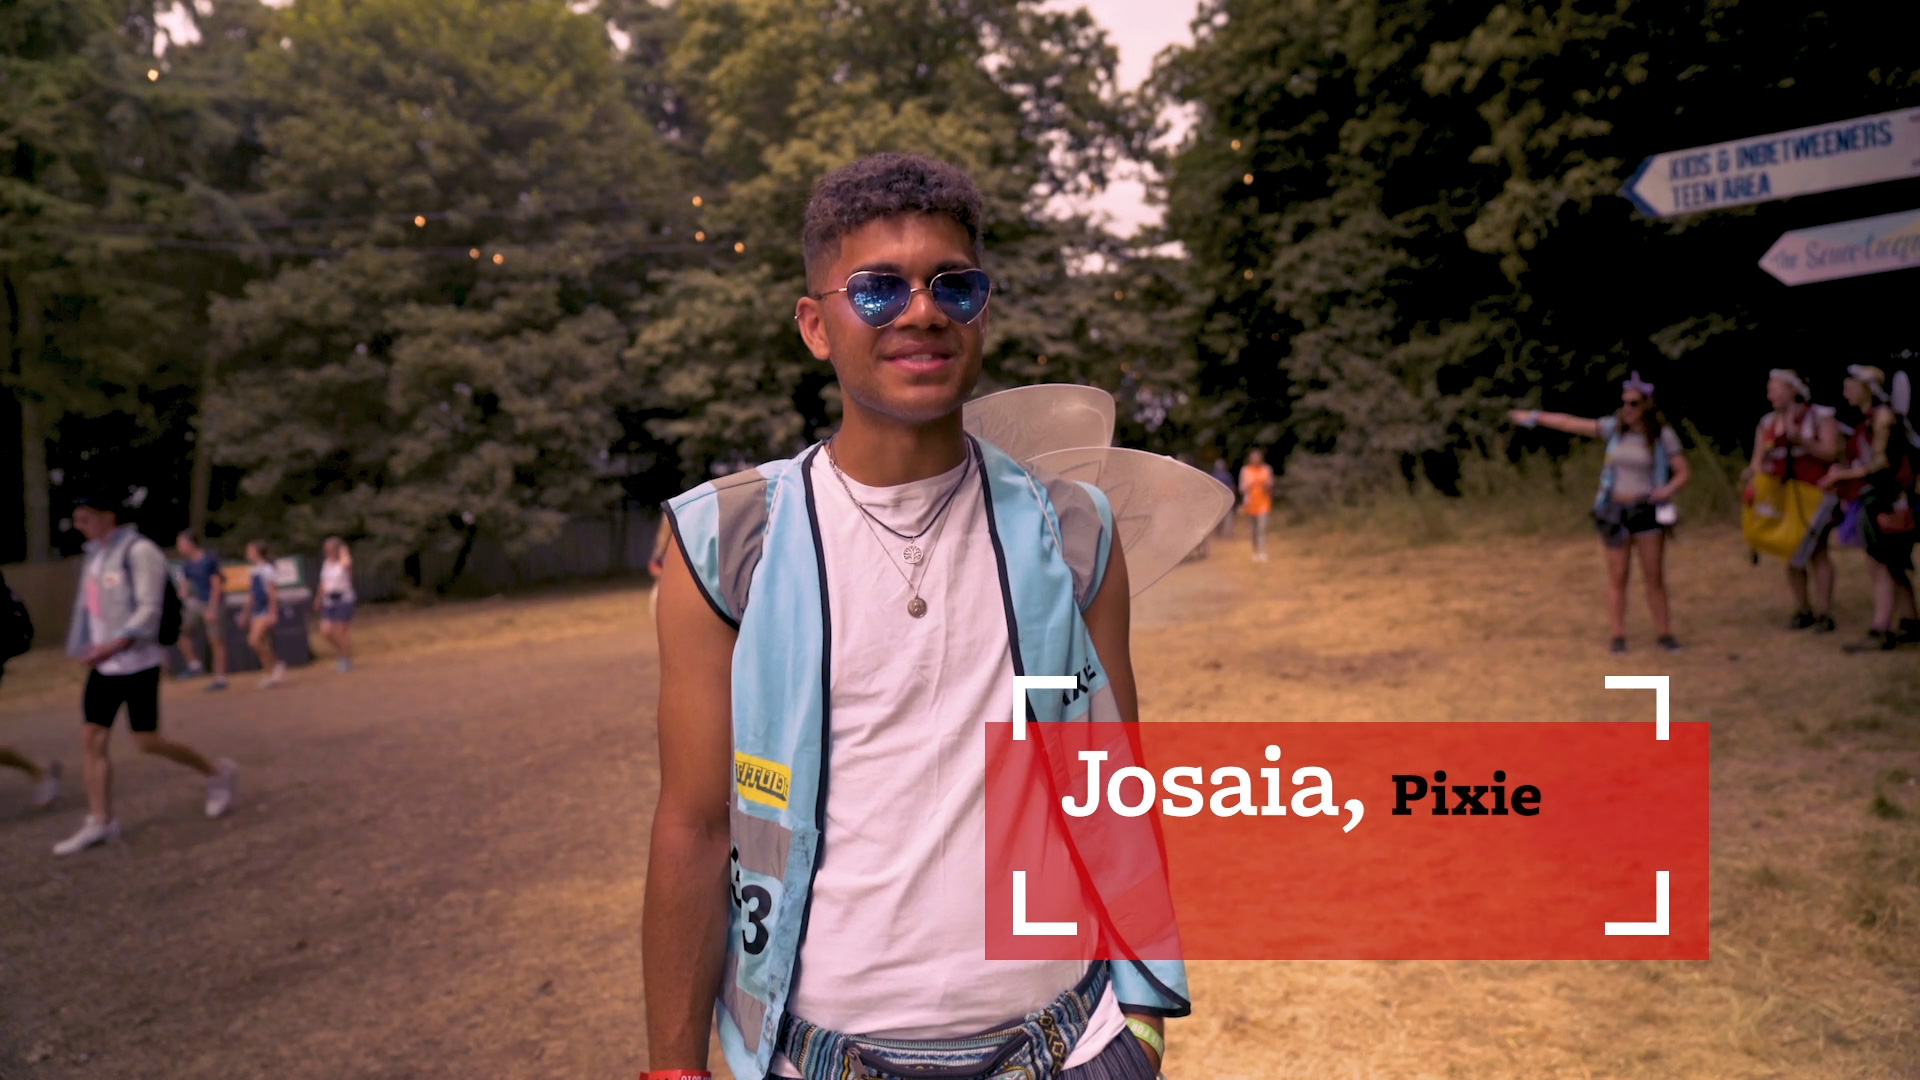 Josaia an Arena Pixie Steward volunteering with Hotbox Events at Latitude Festival!